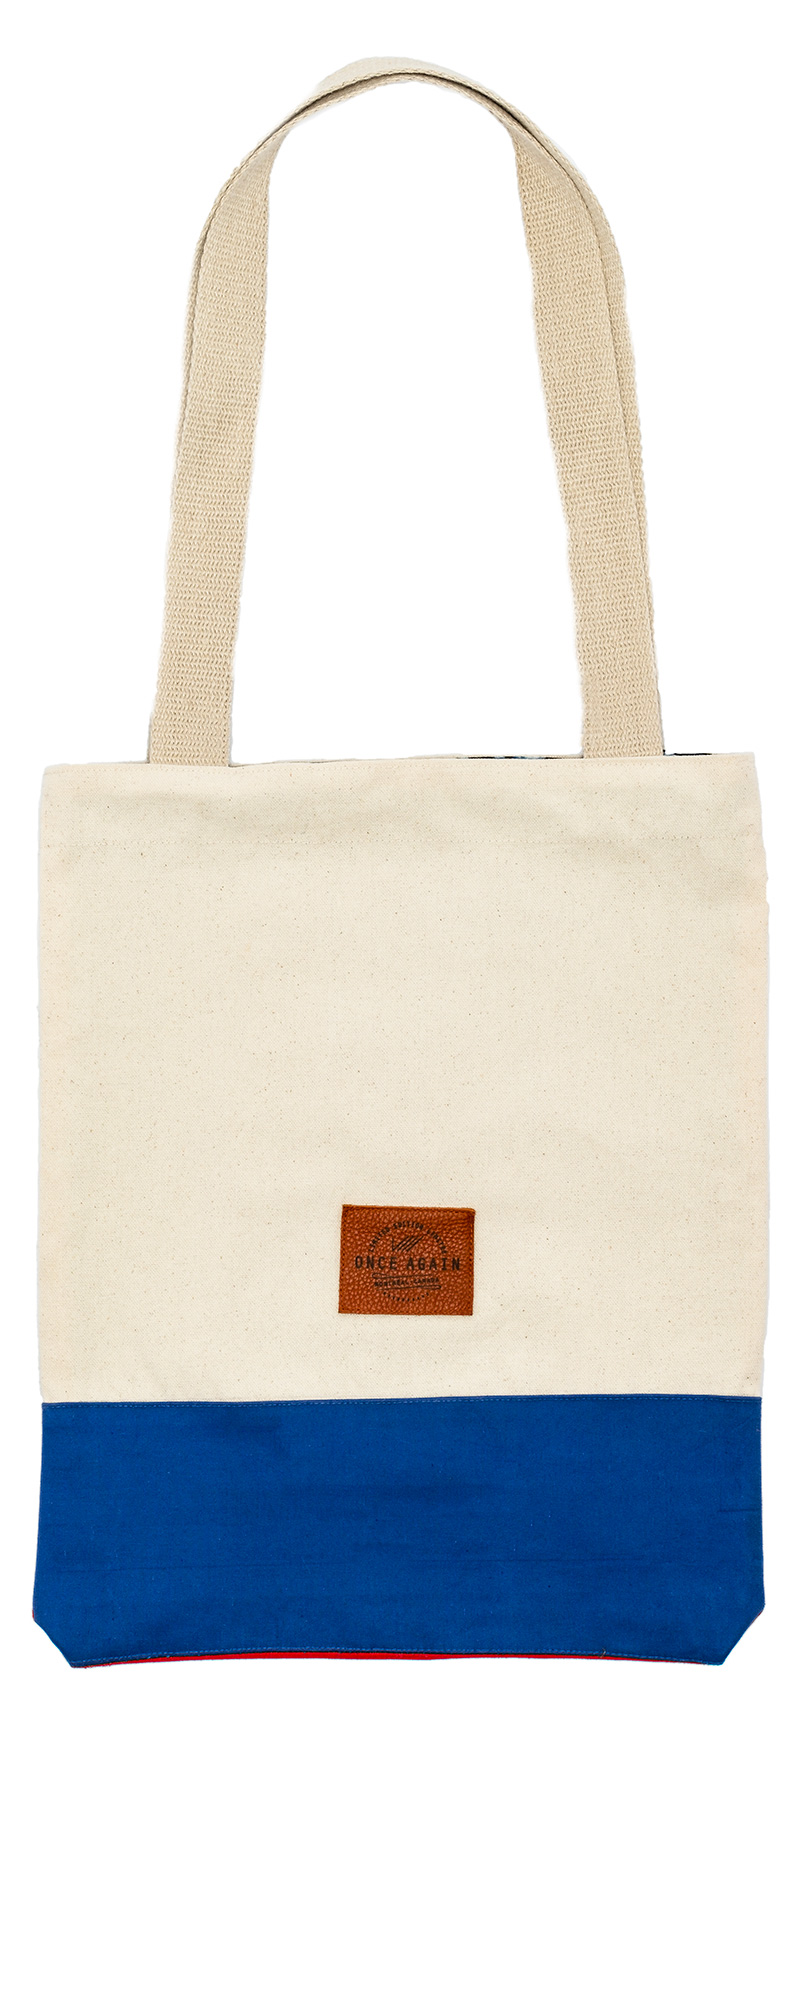 Tote bag in recycled materials with reinforced interior pocket.